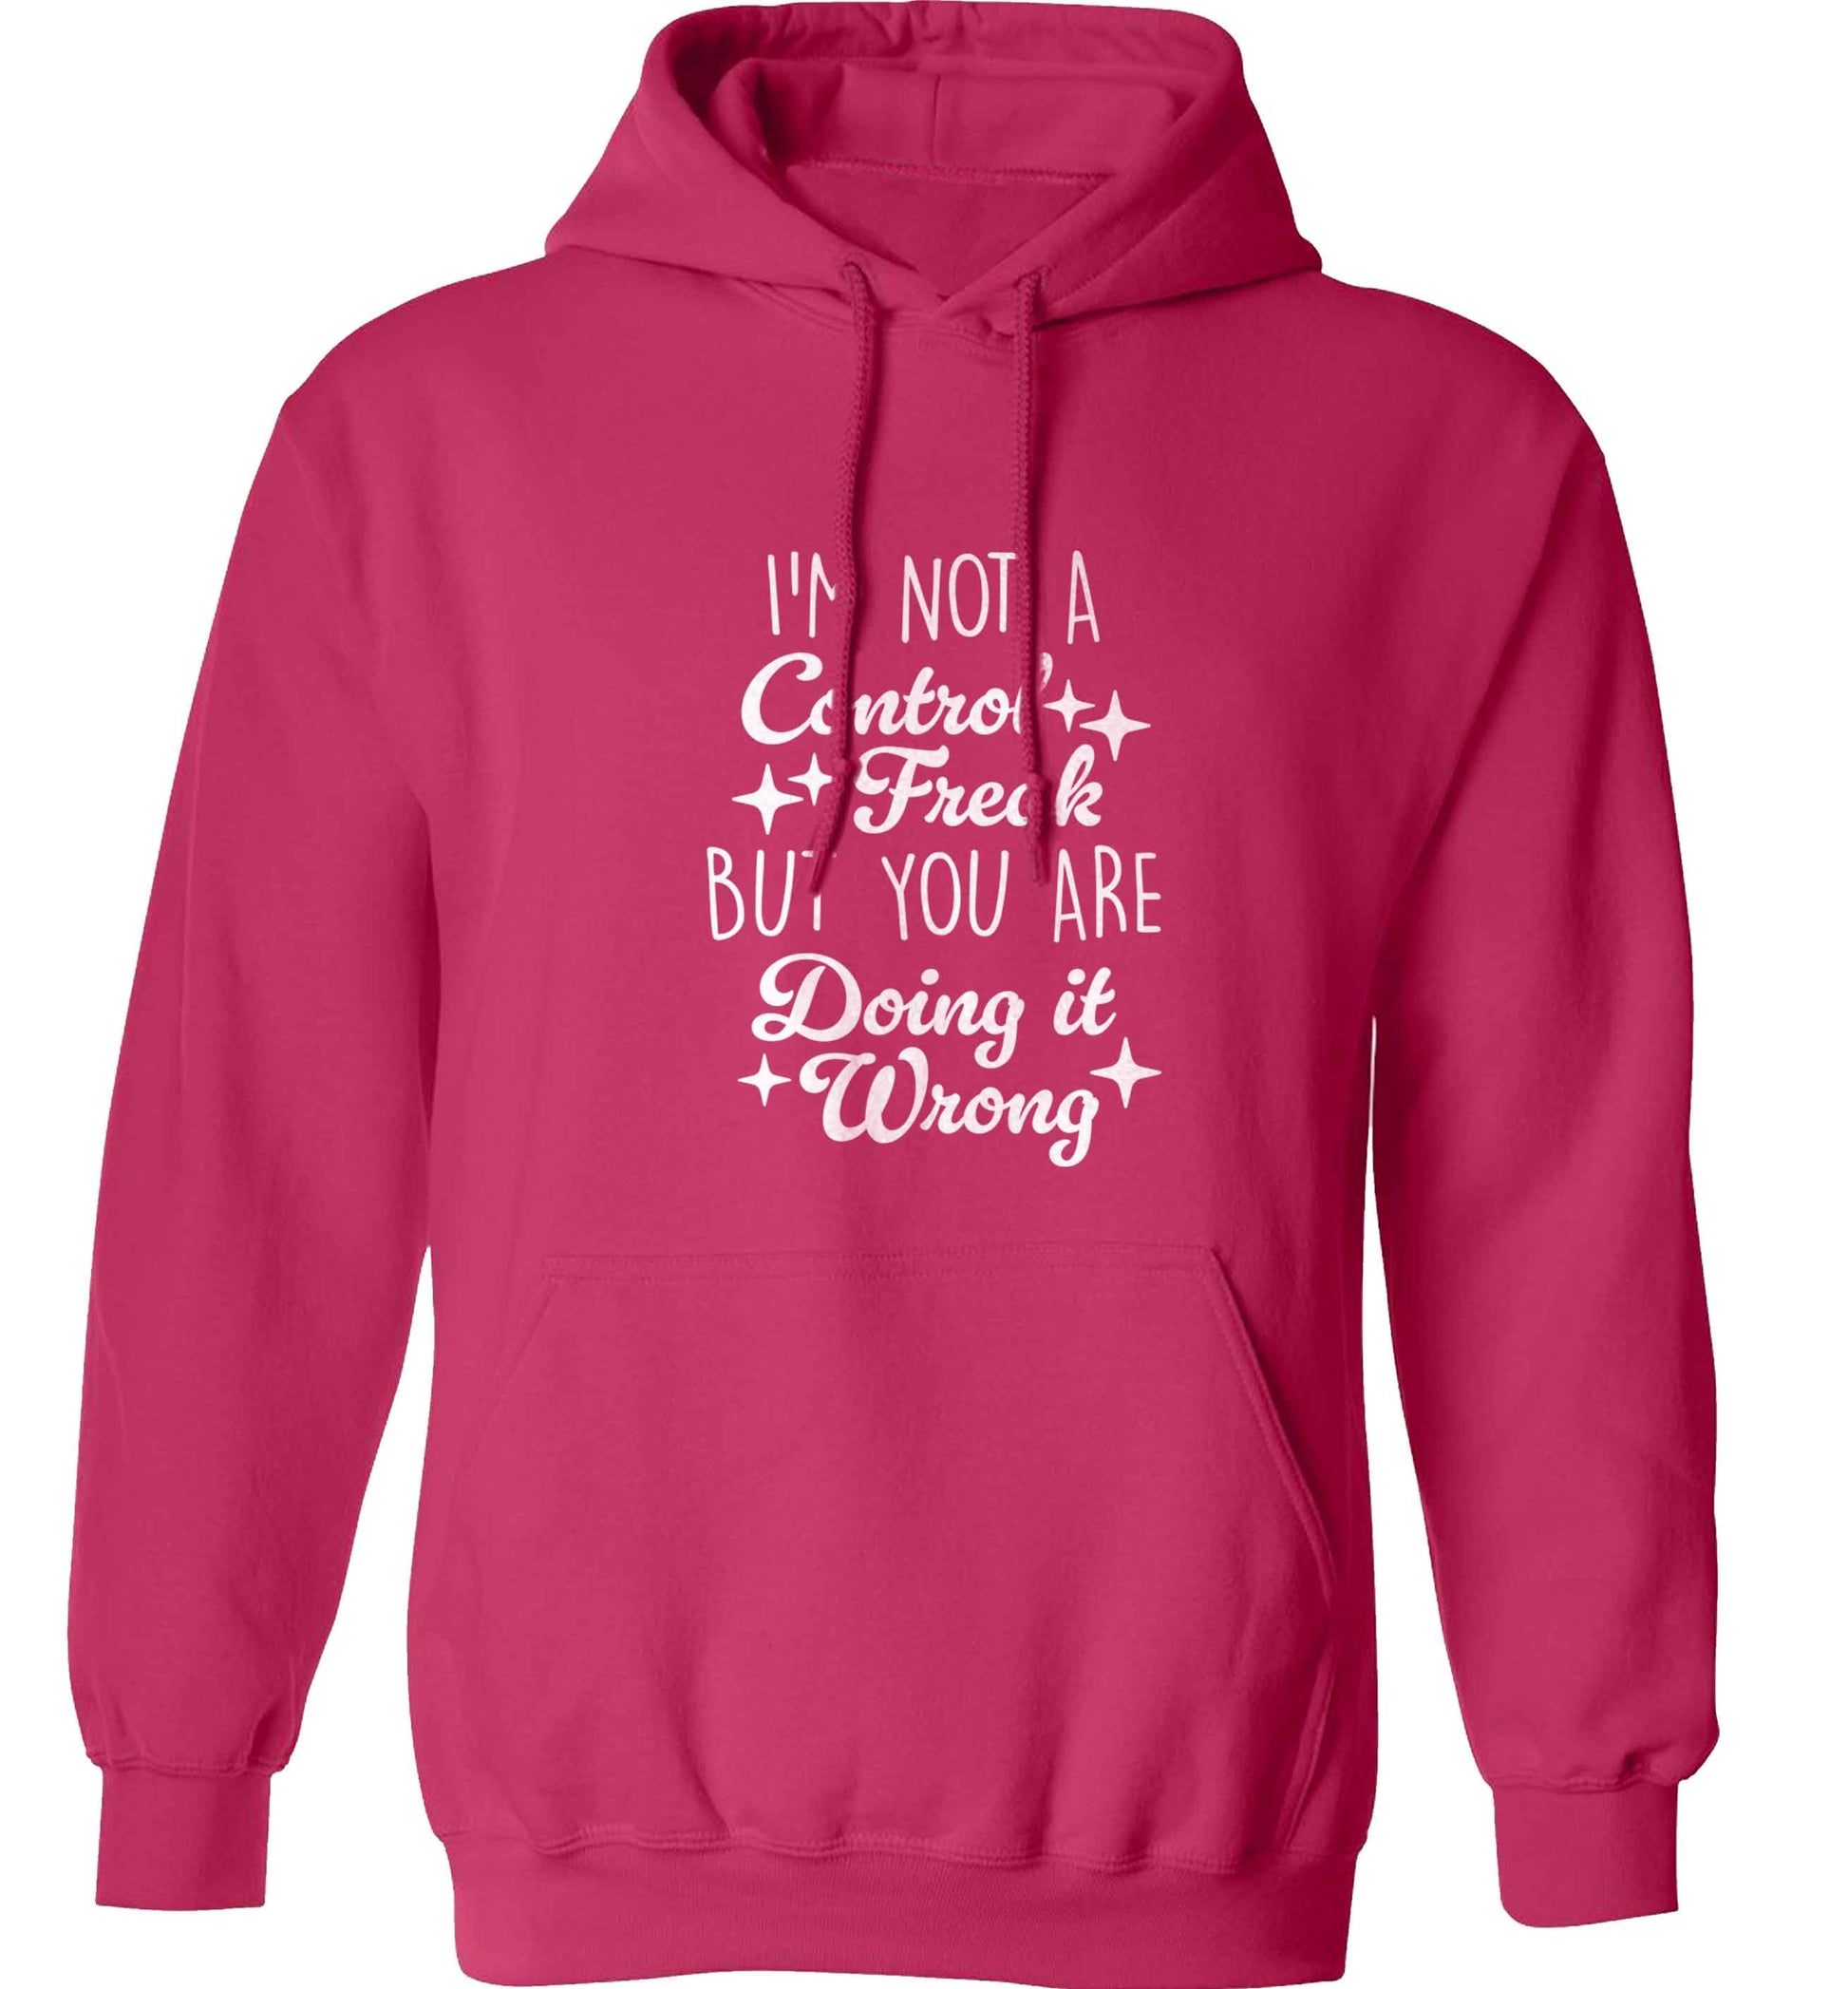 I'm not a control freak but you are doing it wrong adults unisex pink hoodie 2XL